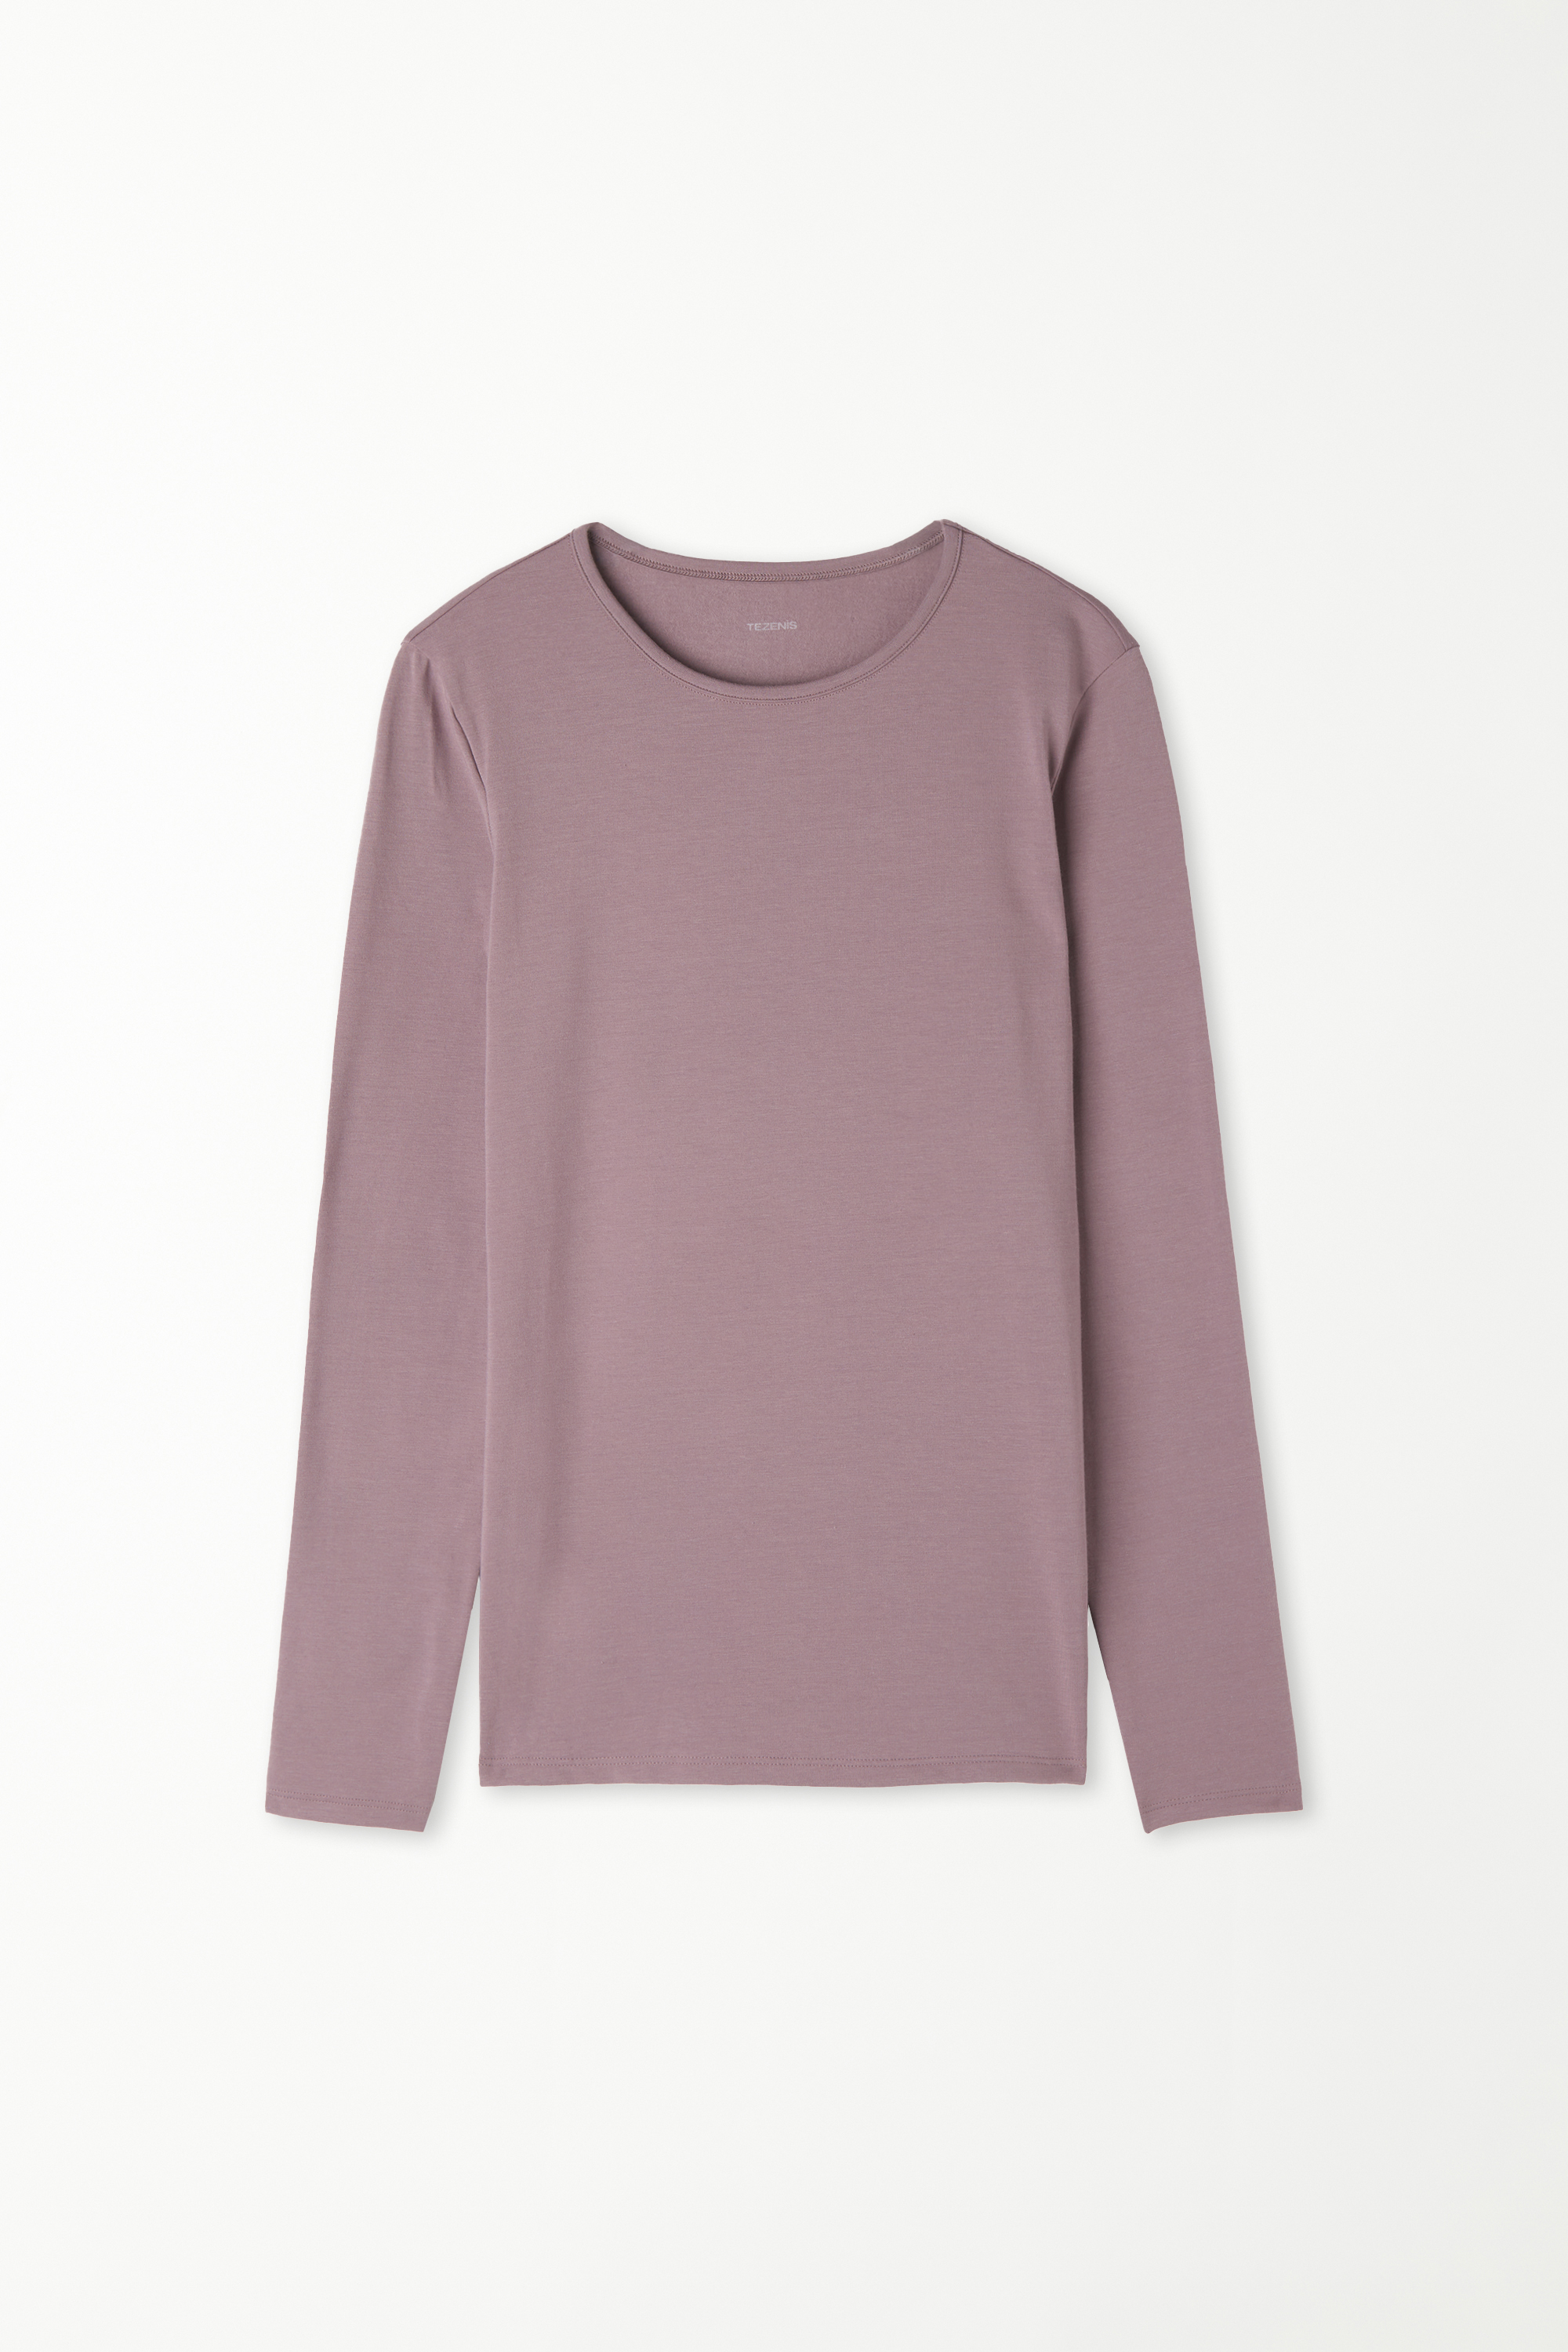 Cotton and Thermal Modal Rounded Neck Top